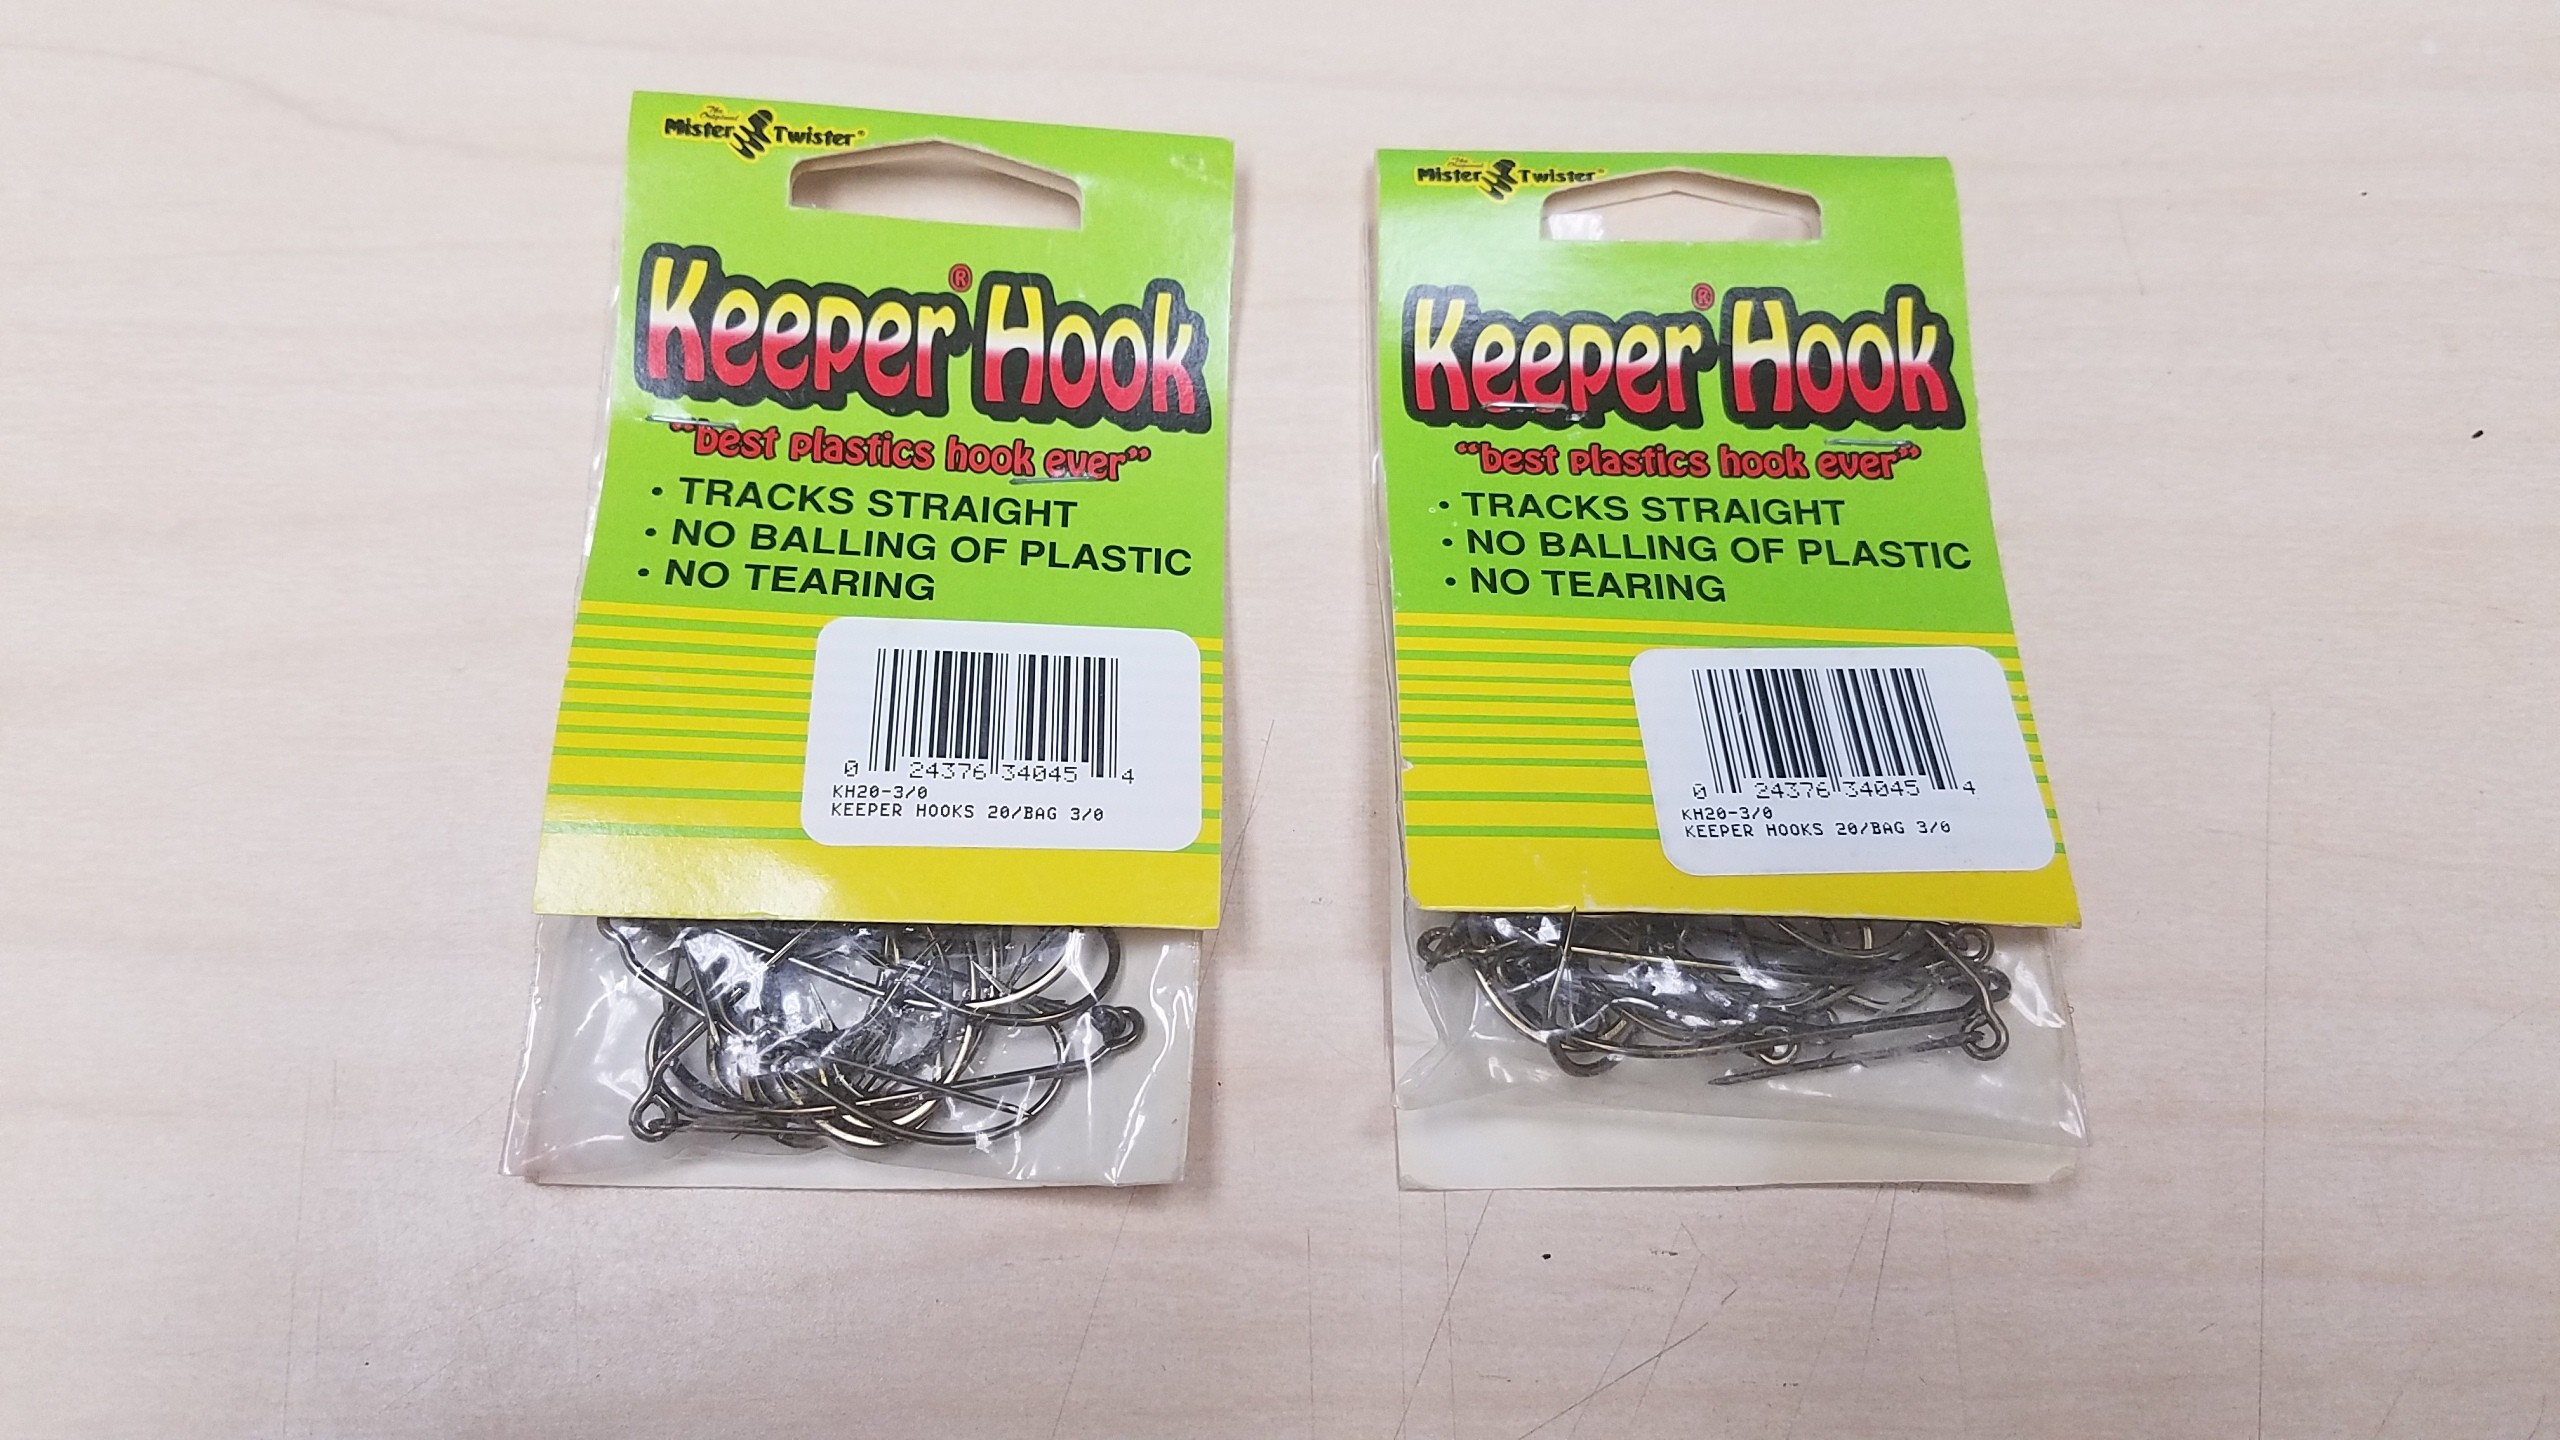 Mister Twister KH20-3/0 Keeper Hooks Size 3/0 2 20 Count Bags